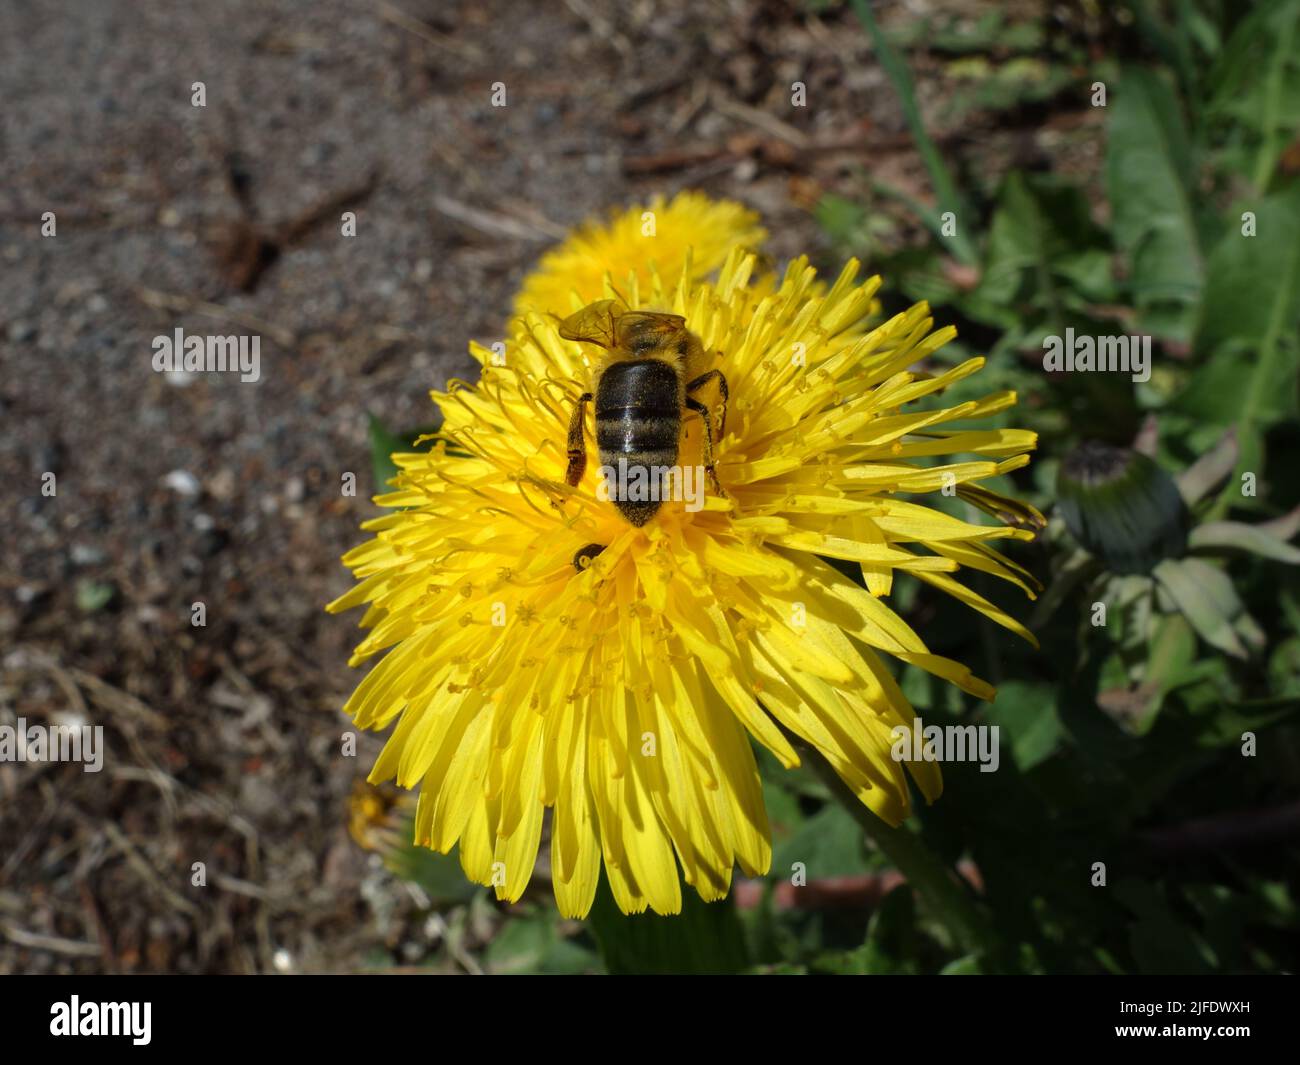 Honeybee or Melittidae that collects nectar in the middle of the Dandelion flower. Stock Photo